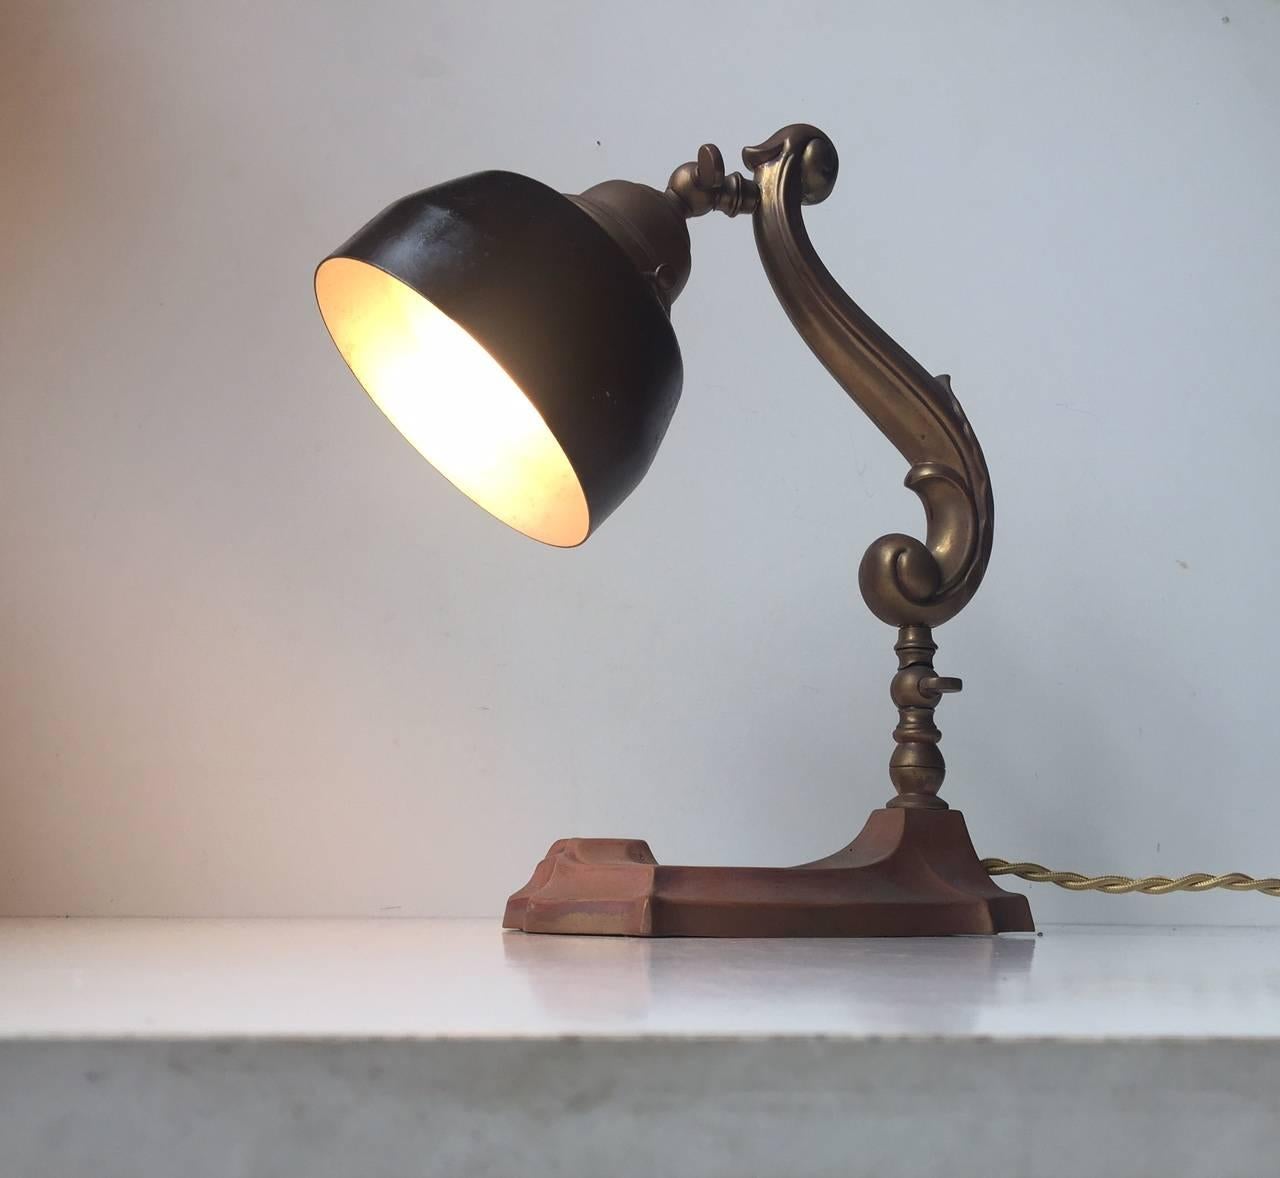 Early 20th Century Danish 1920s Art Nouveau Patinated Copper and Brass Table Lamp